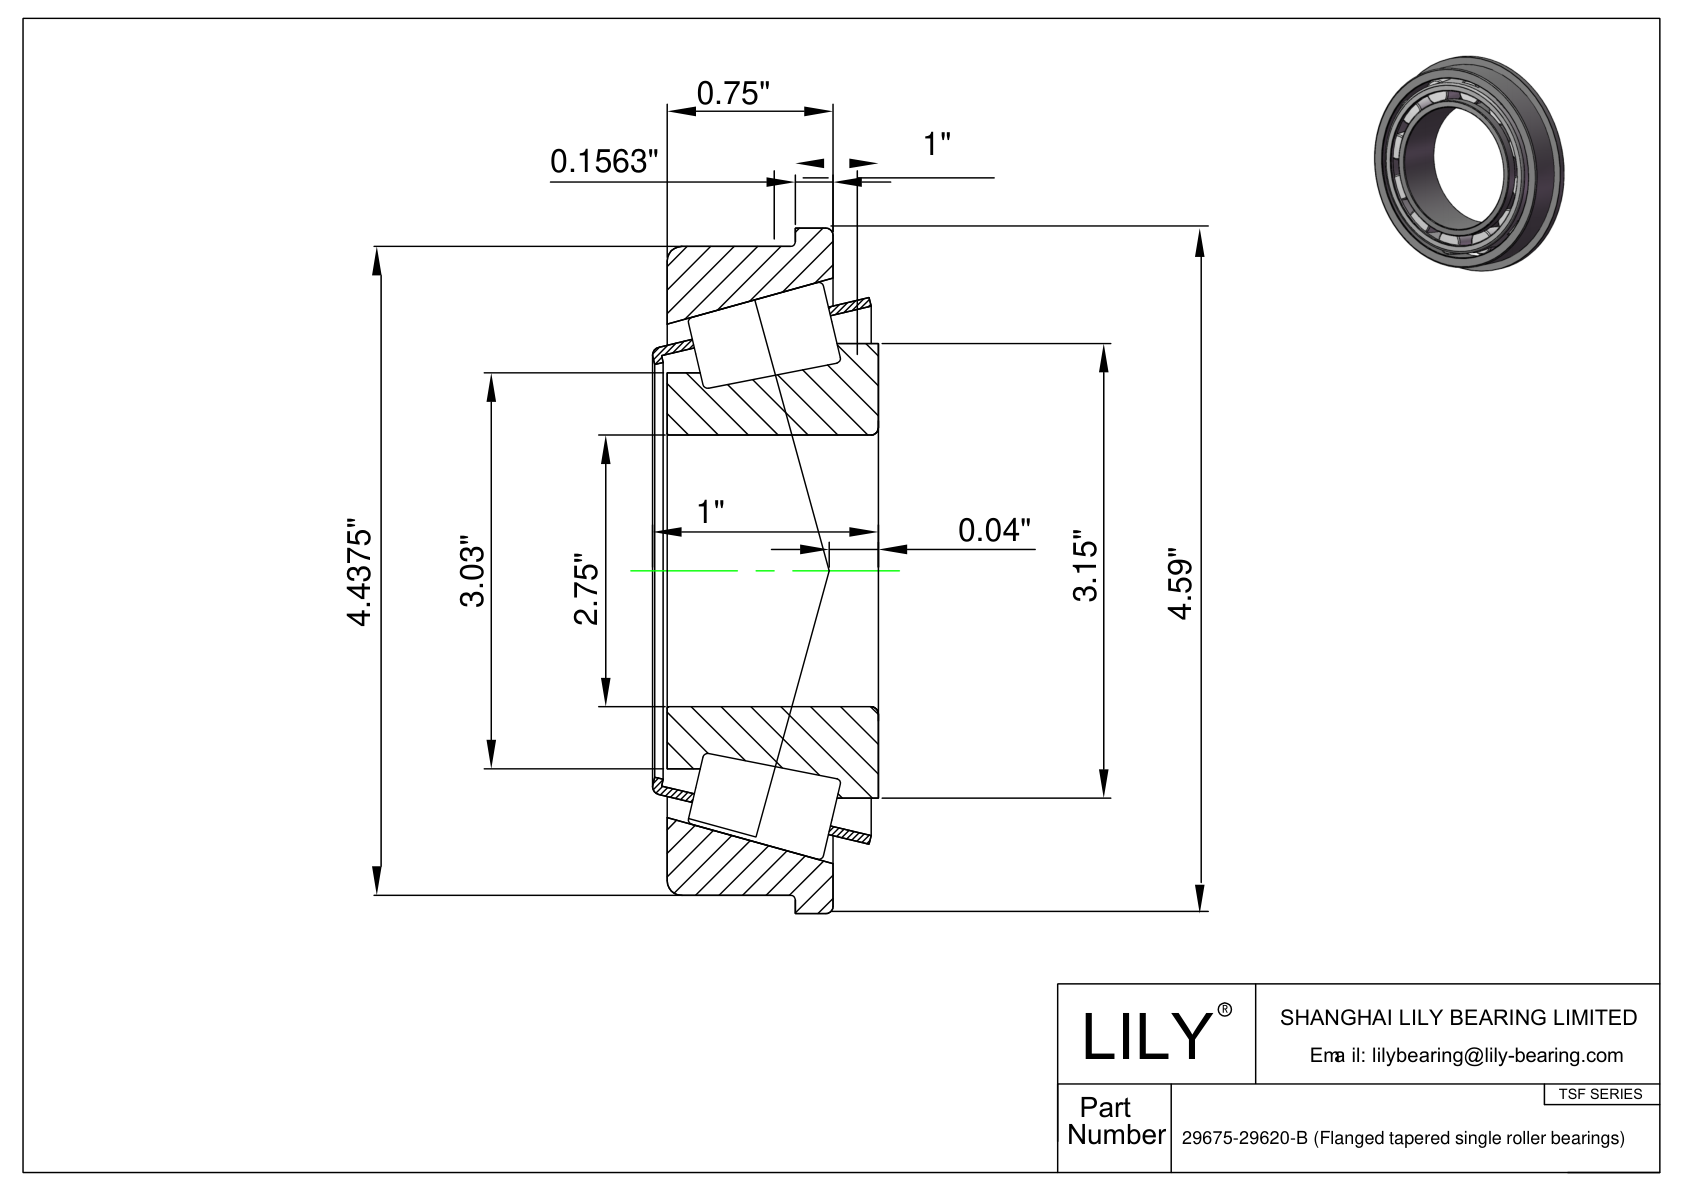 29675-29620-B TSF (Tapered Single Roller Bearings with Flange) (Imperial) cad drawing